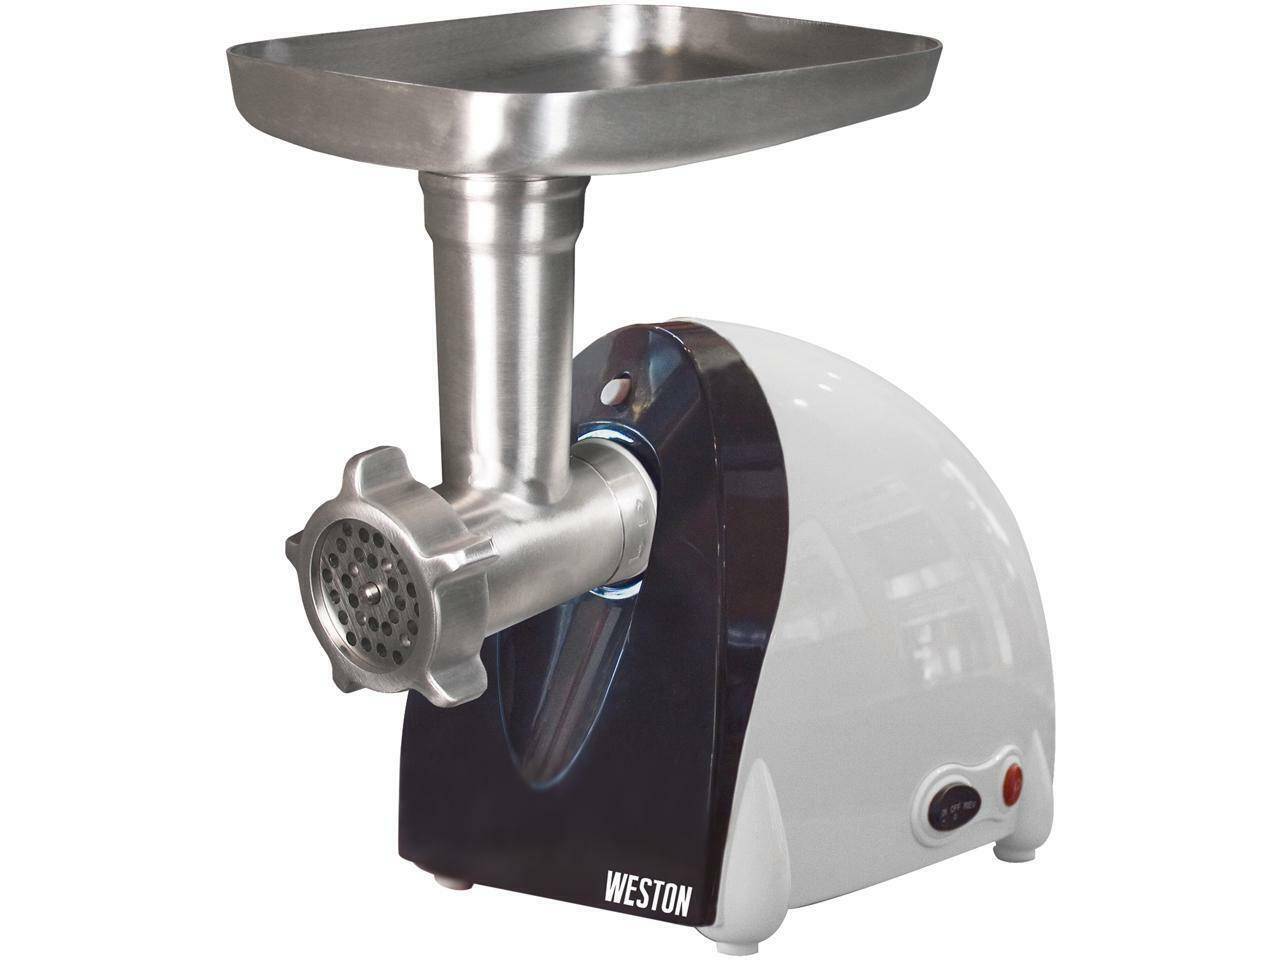 Weston #12 1 HP Electric Meat Grinder and Sausage Stuffer 33-1301